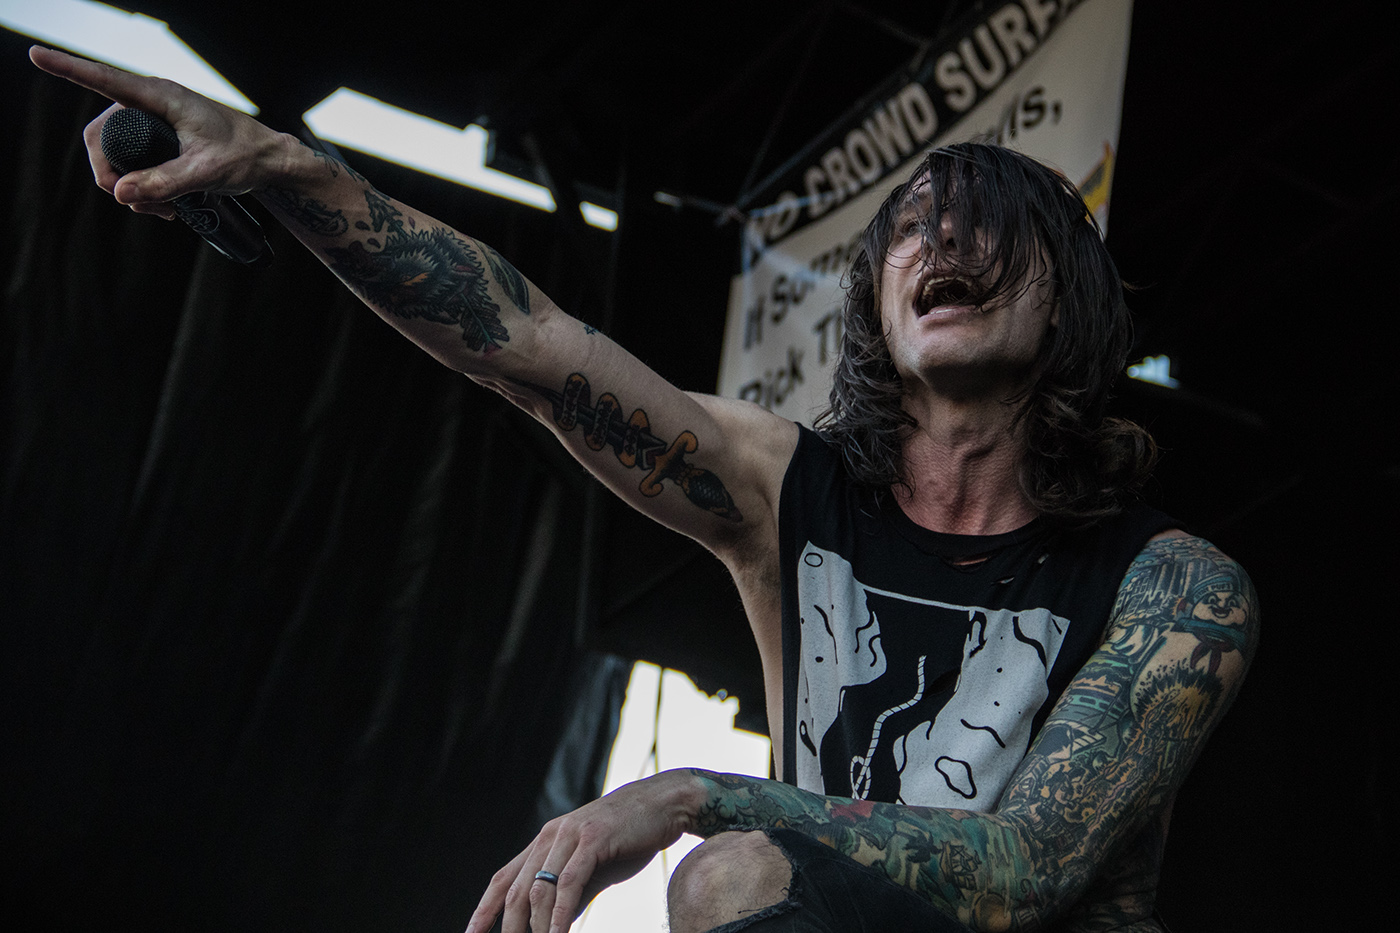 blessthefall band bands Singer seattle warpedtour press Photography  livemusic concert